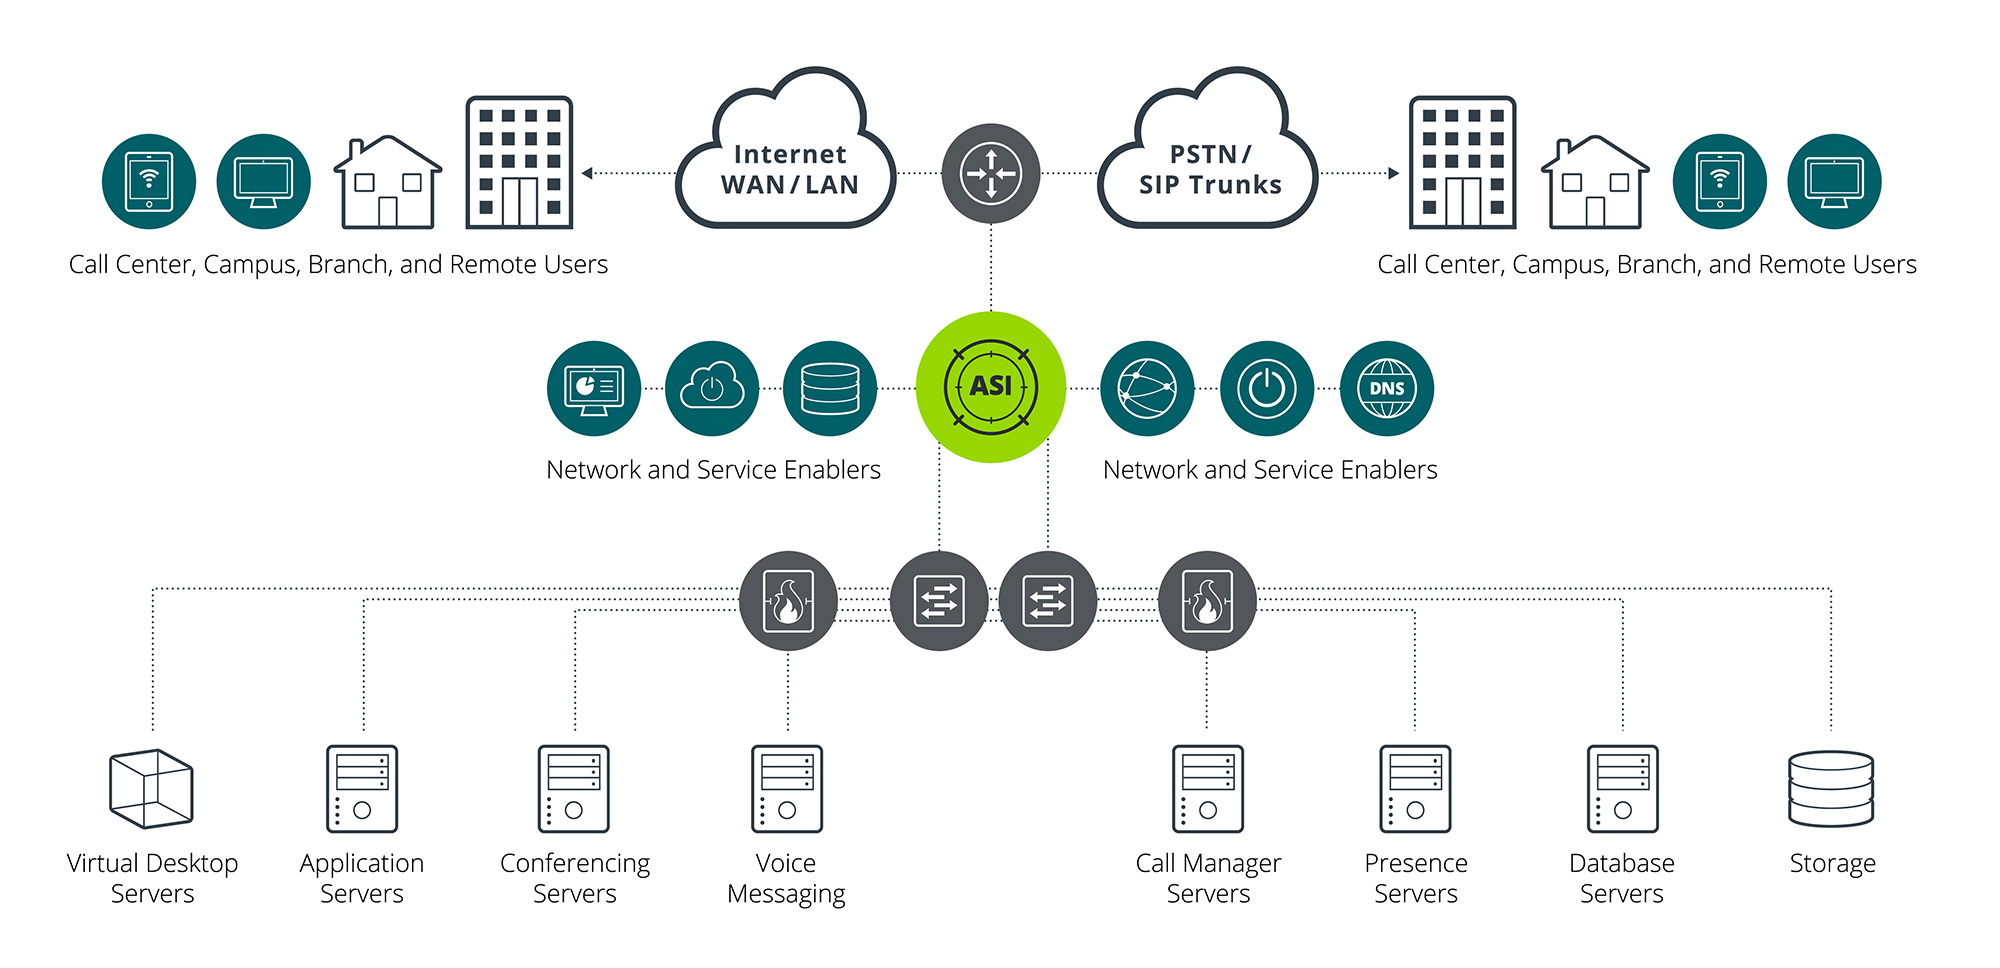 NETSCOUT Solution for Microsoft Unified Communications